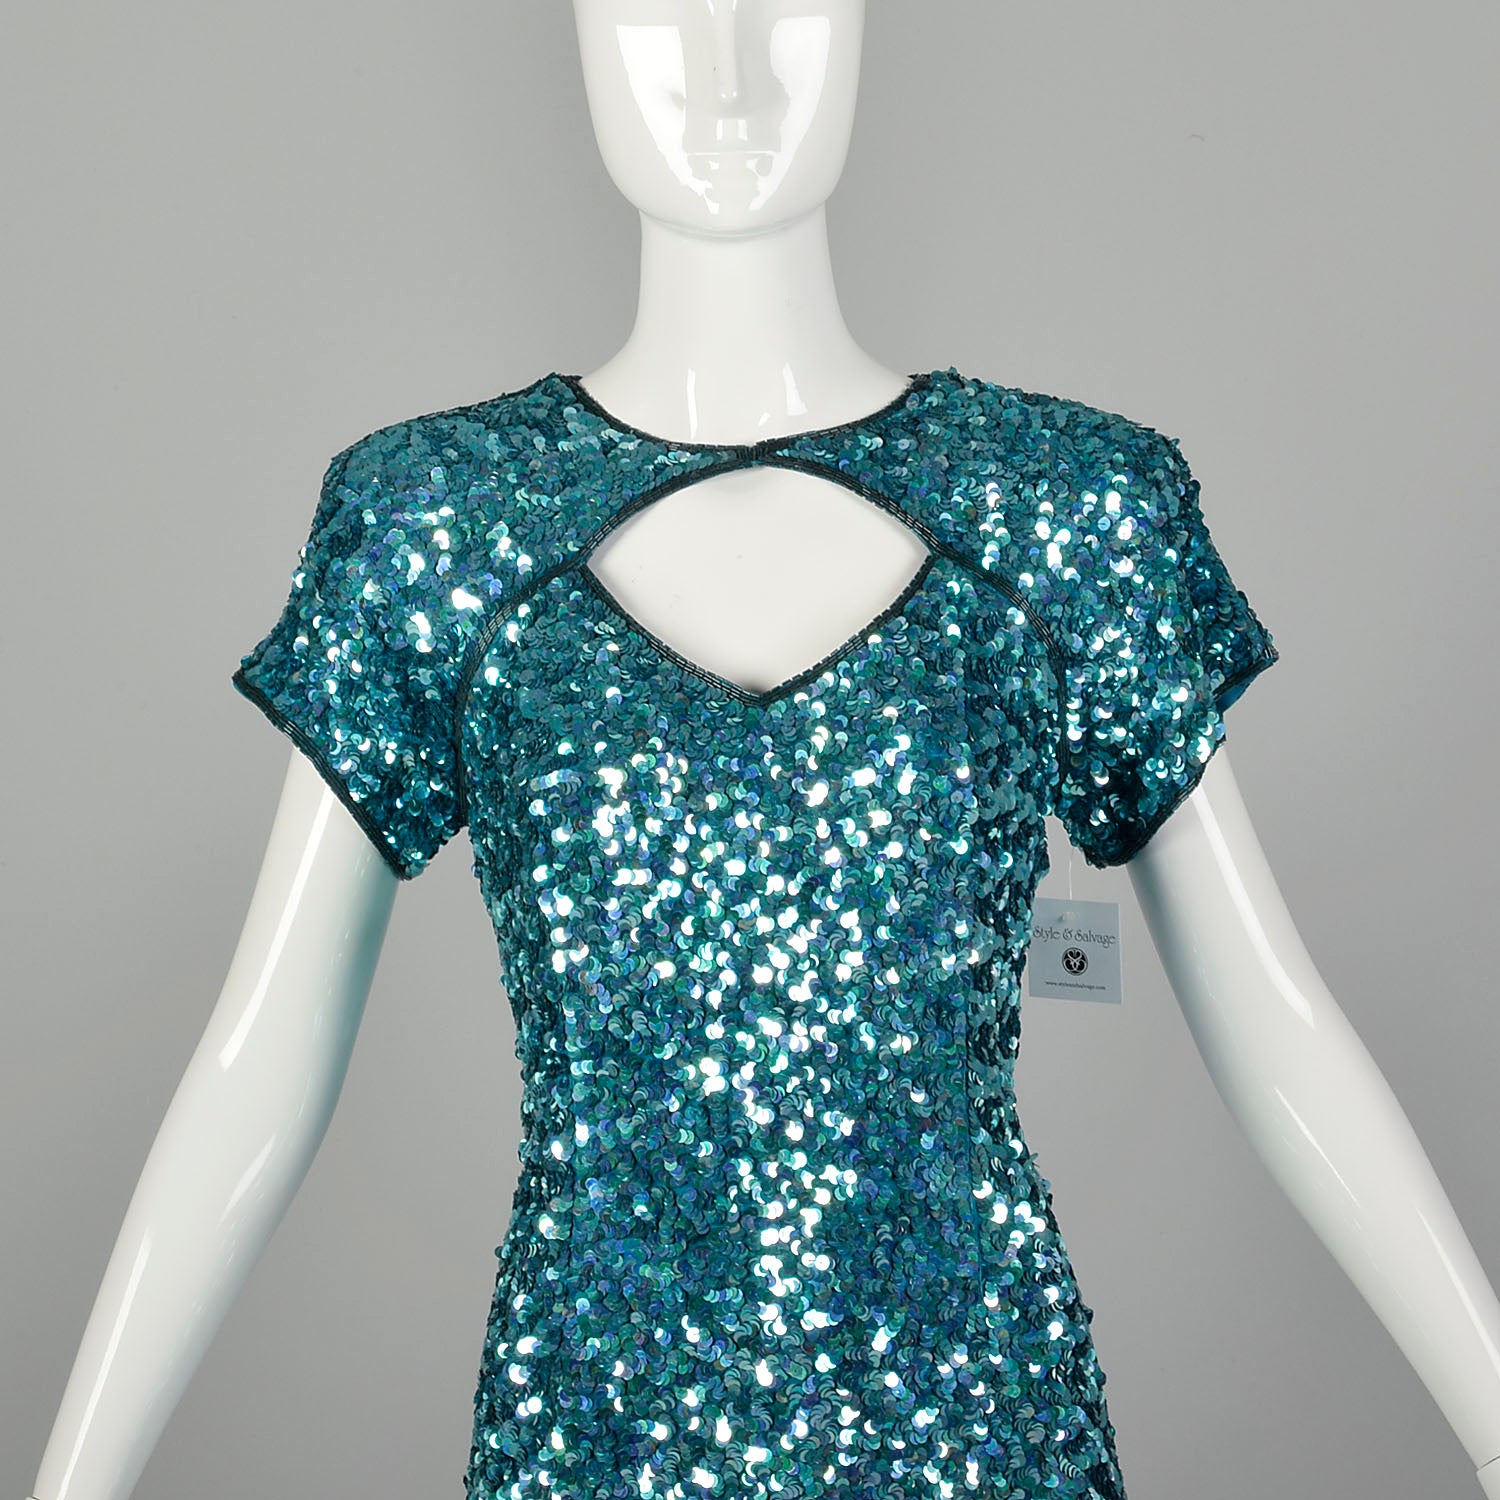 Small Sequin Cocktail Party Dress Teal Blue Short Sleeve Key Hole Bust